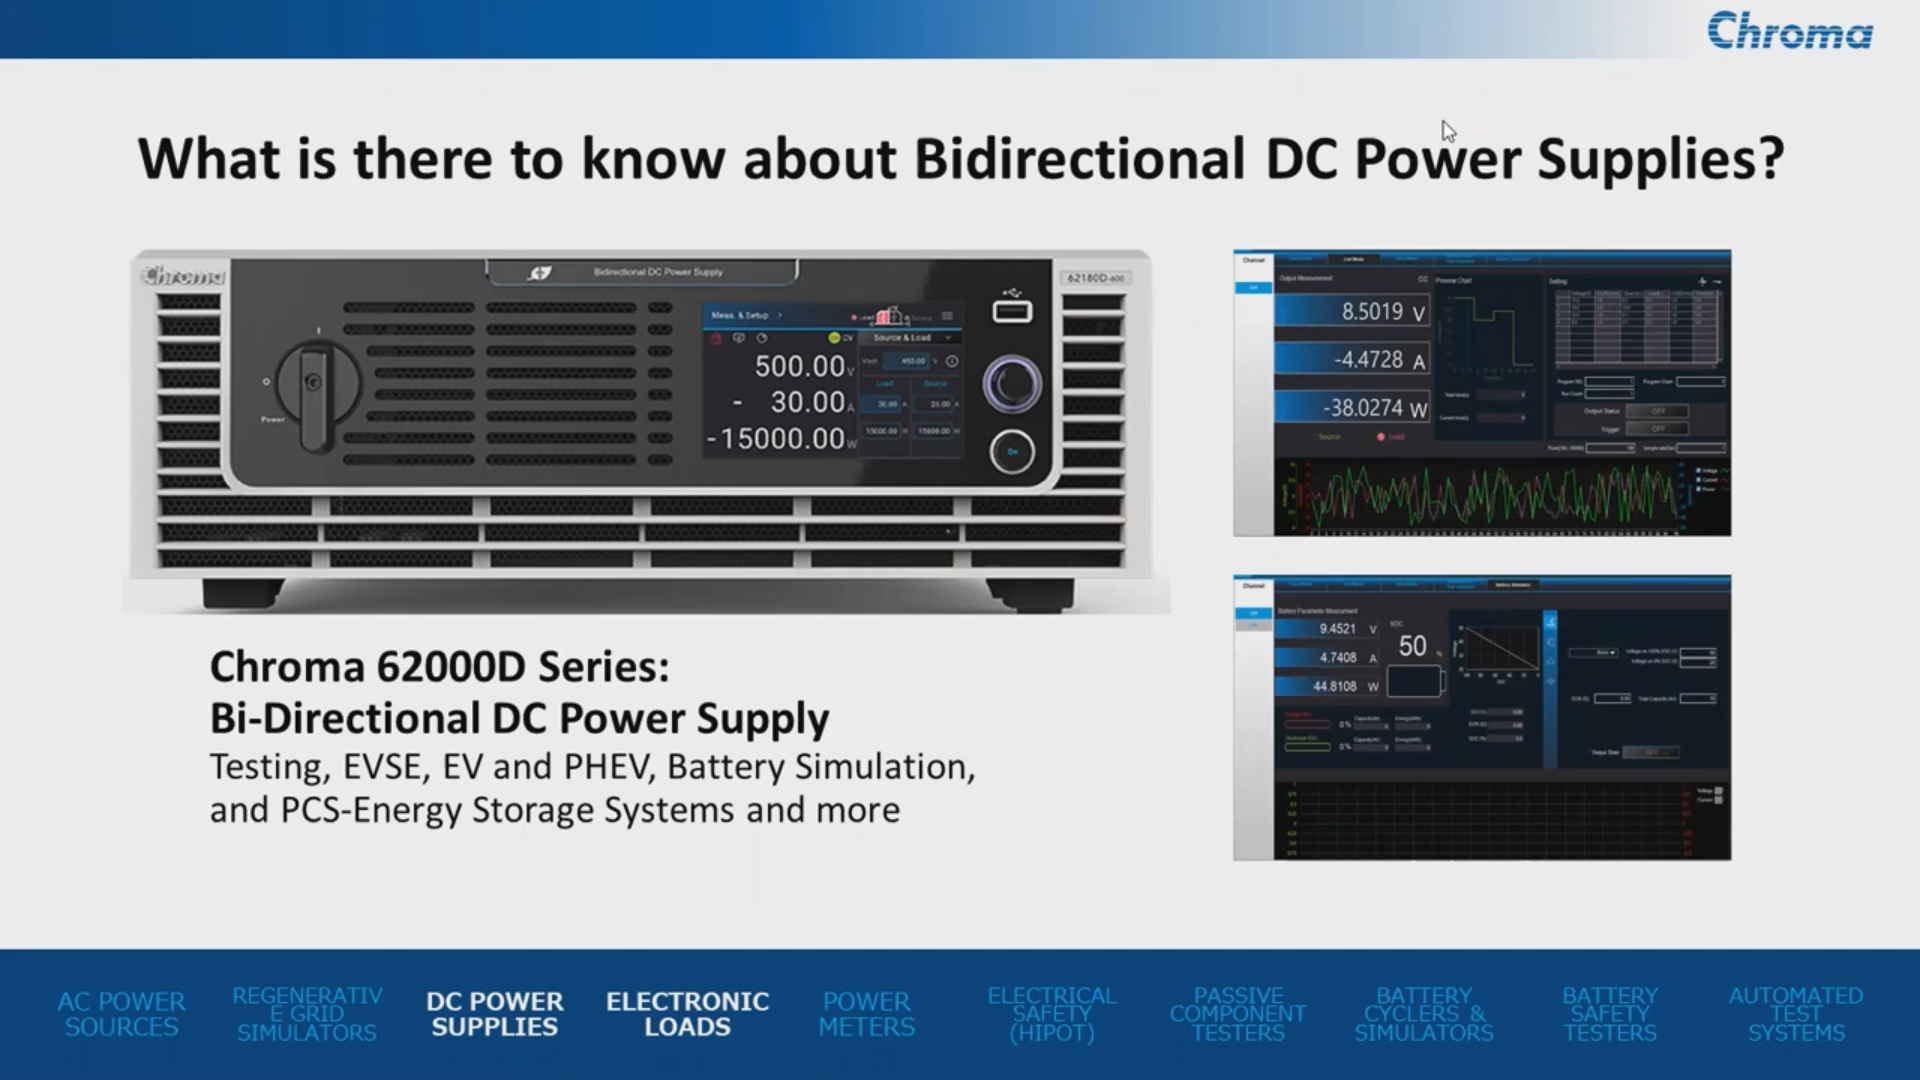 What is there to know about Bidirectional DC Power Supplies?